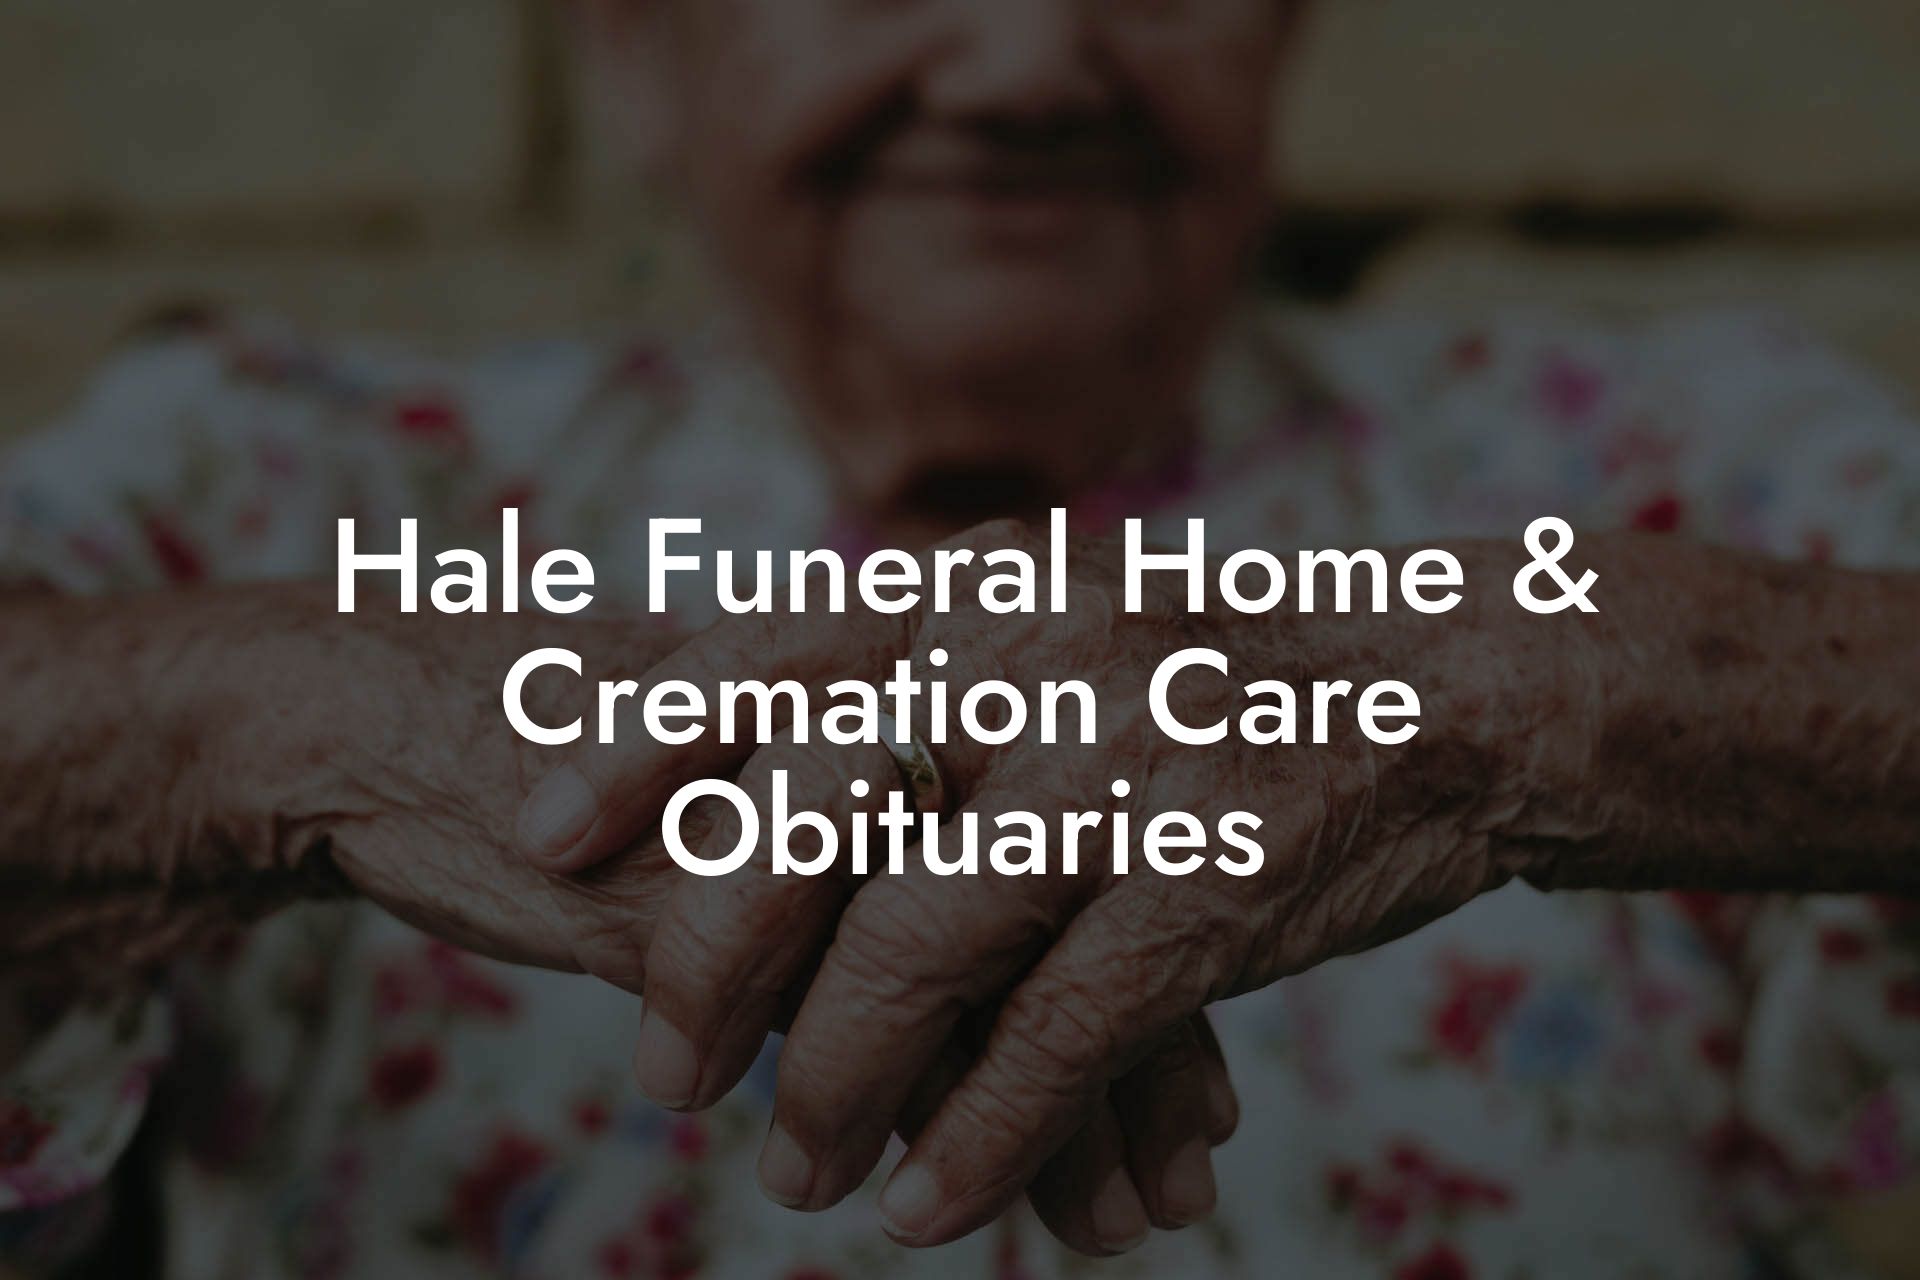 Hale Funeral Home & Cremation Care Obituaries